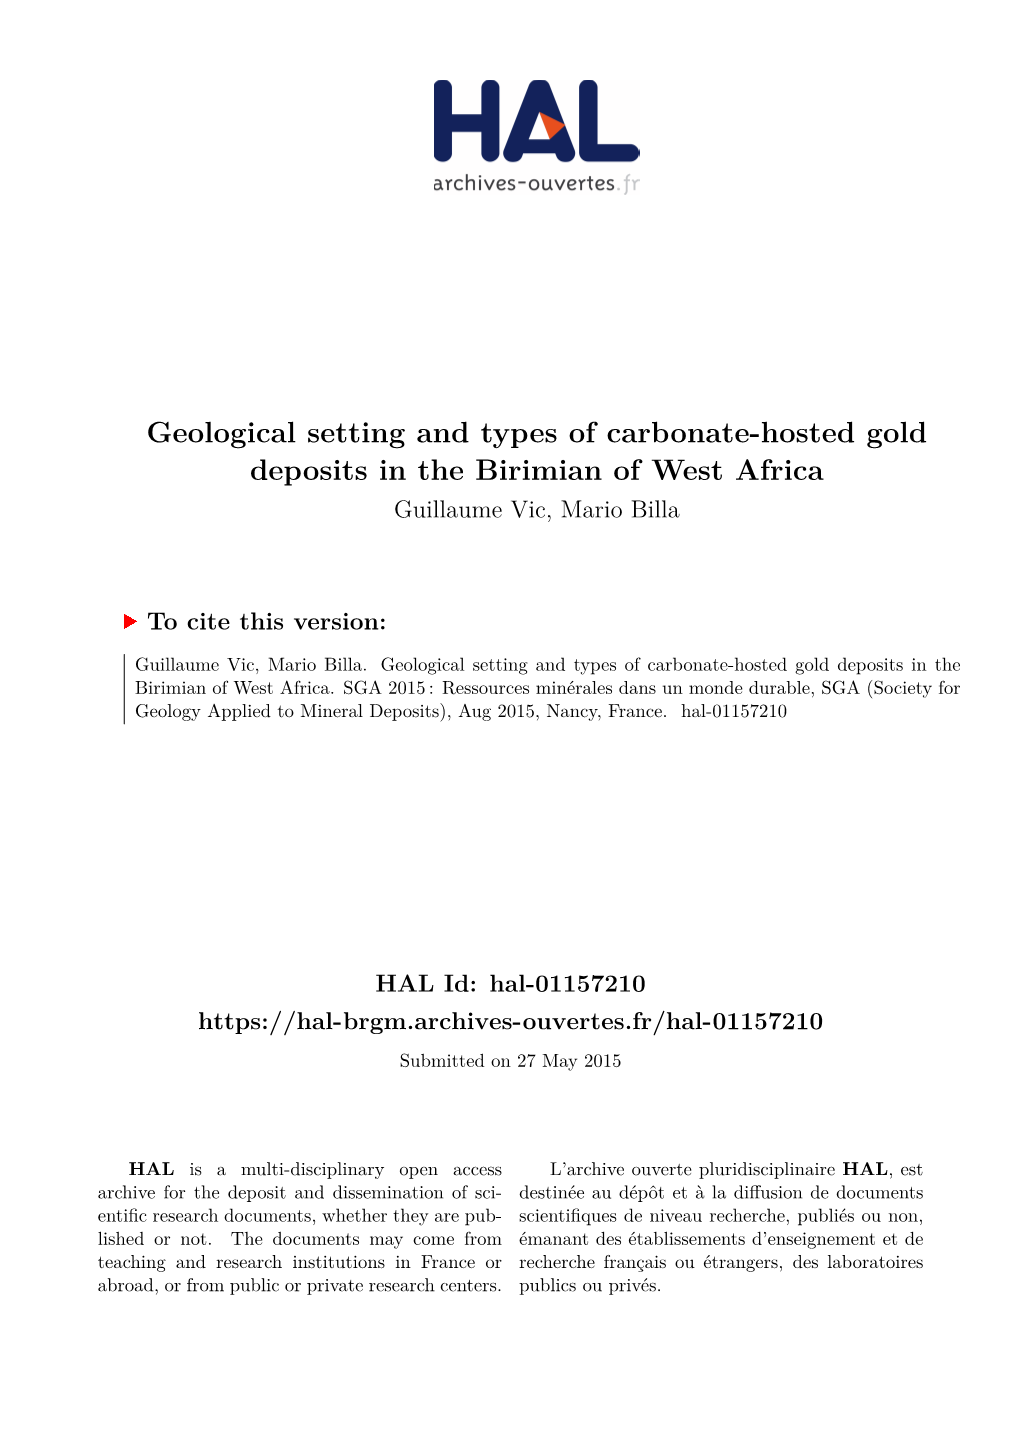 Geological Setting and Types of Carbonate-Hosted Gold Deposits in the Birimian of West Africa Guillaume Vic, Mario Billa